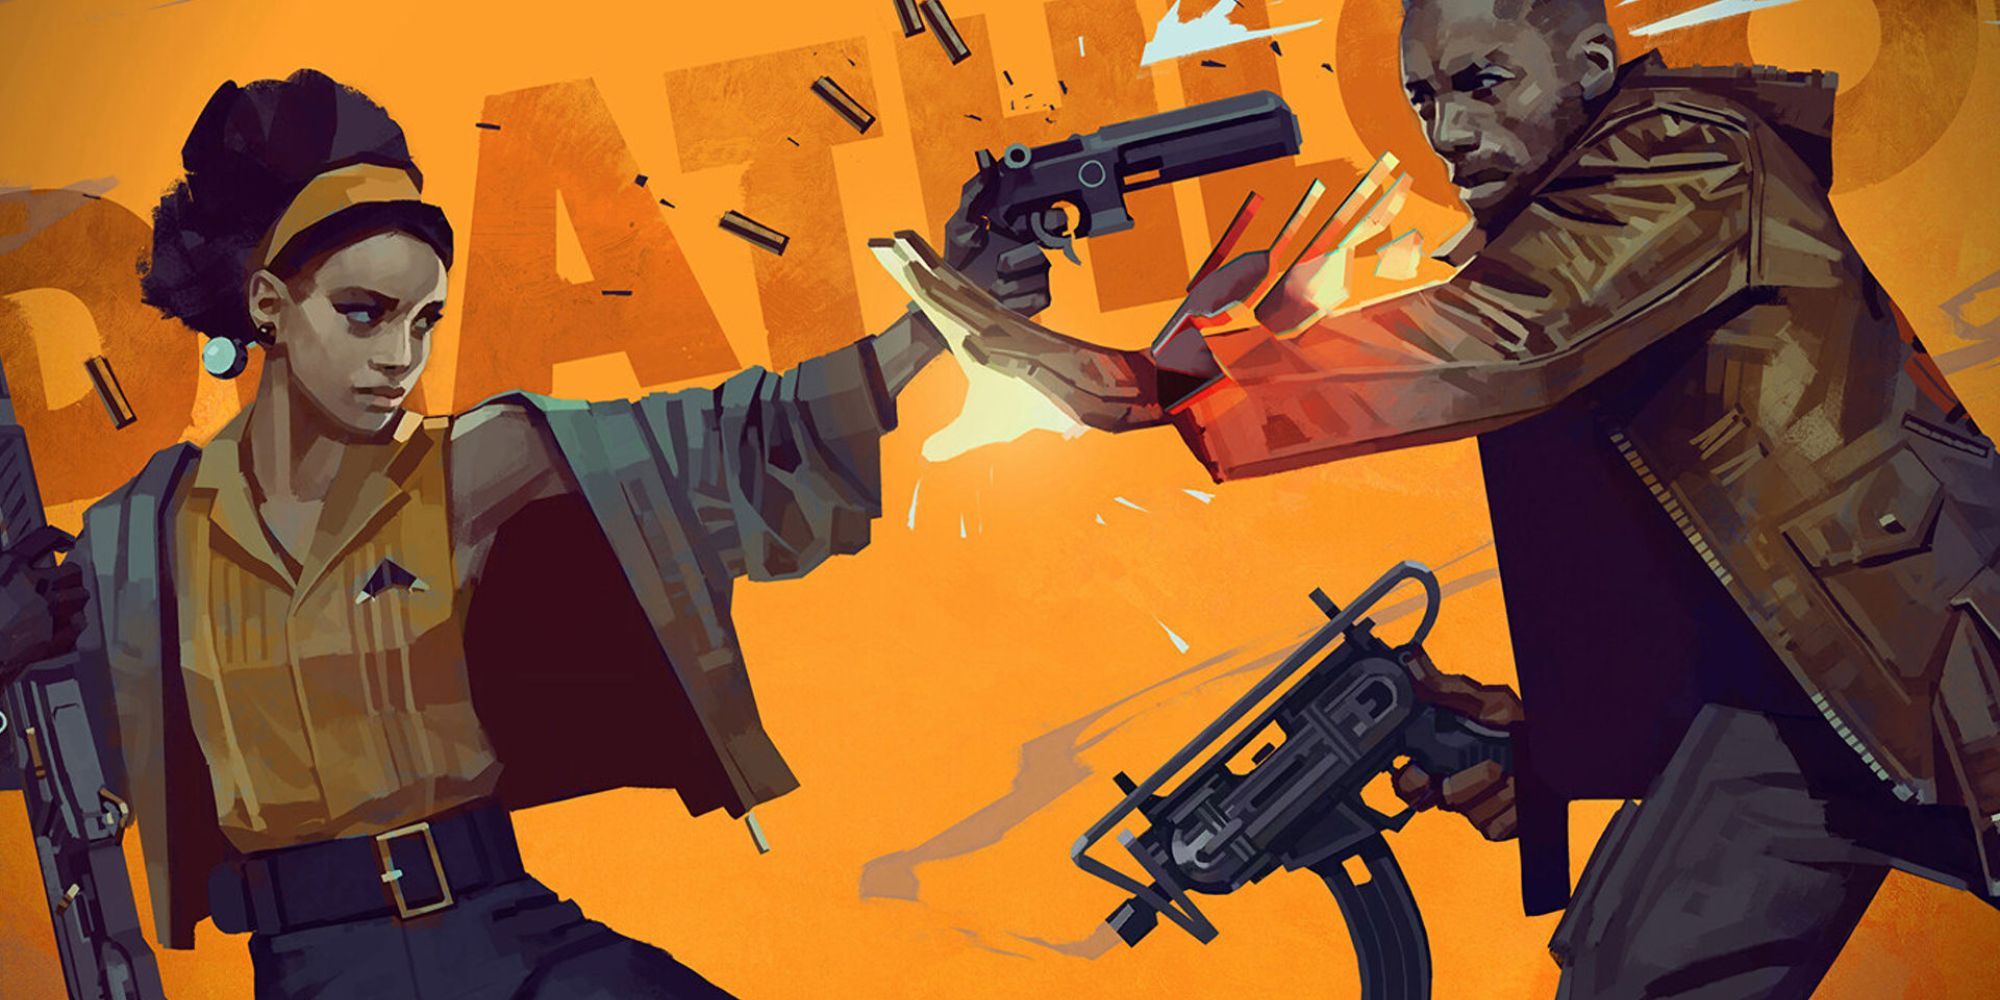 poster for the video game Deathloop showing the characters Colt and Julianna engaged in a gunfight